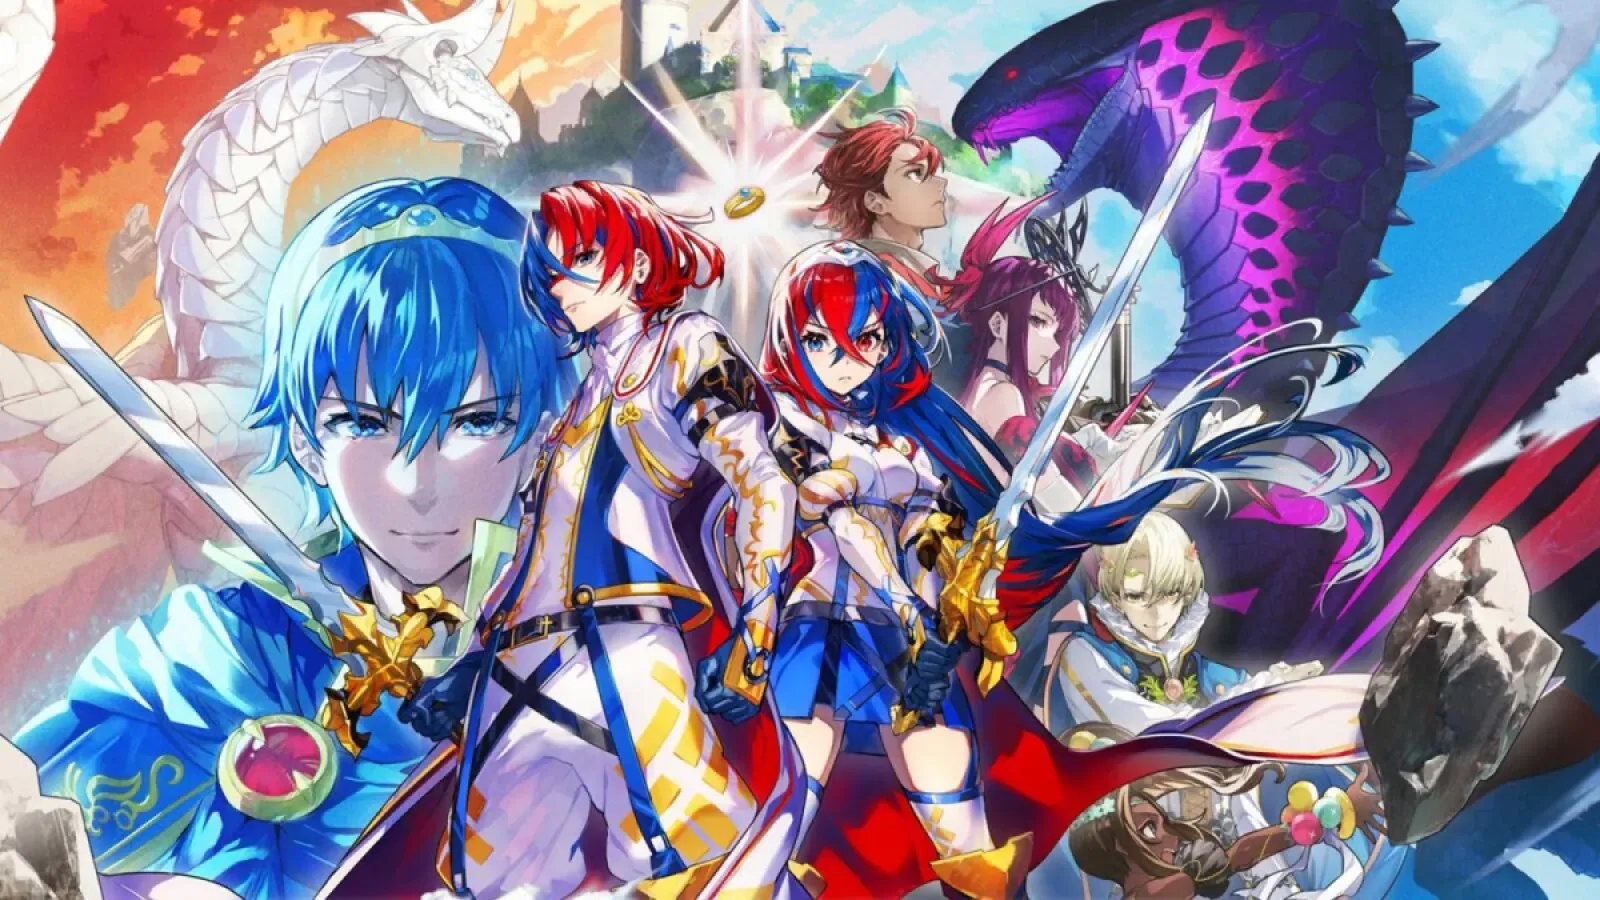 Official game art for Fire Emblem Engage featuring characters from the video game